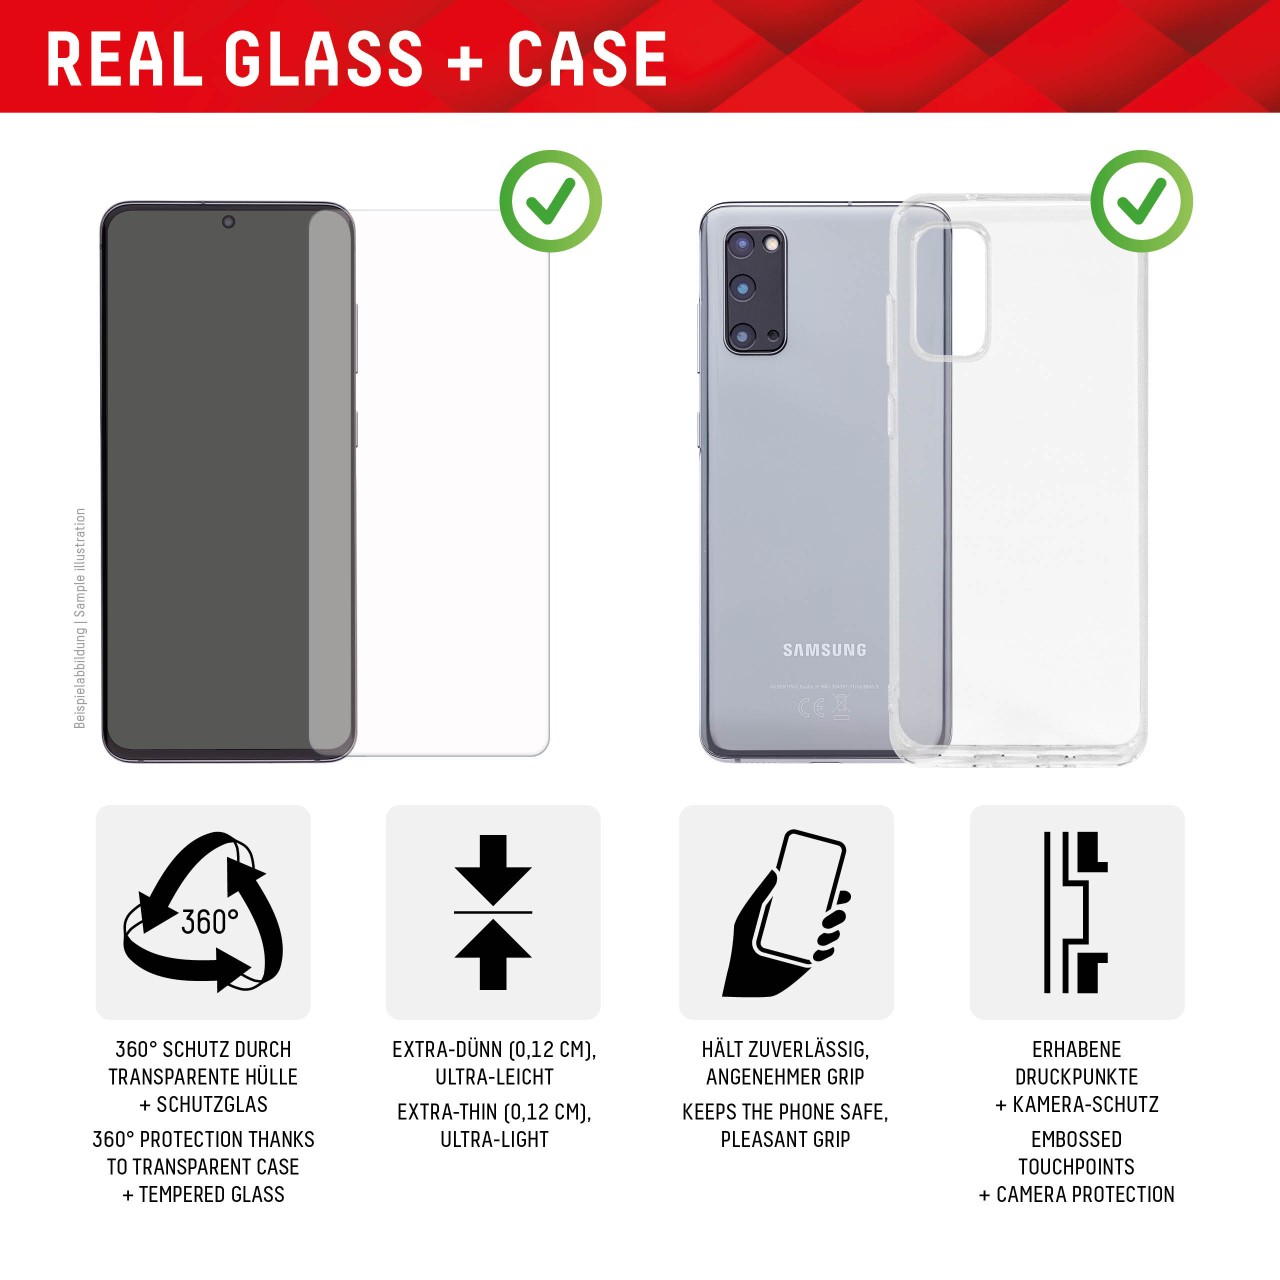 Real Glass for Apple iPhone X/XS/11 Pro (5,8"), 2D